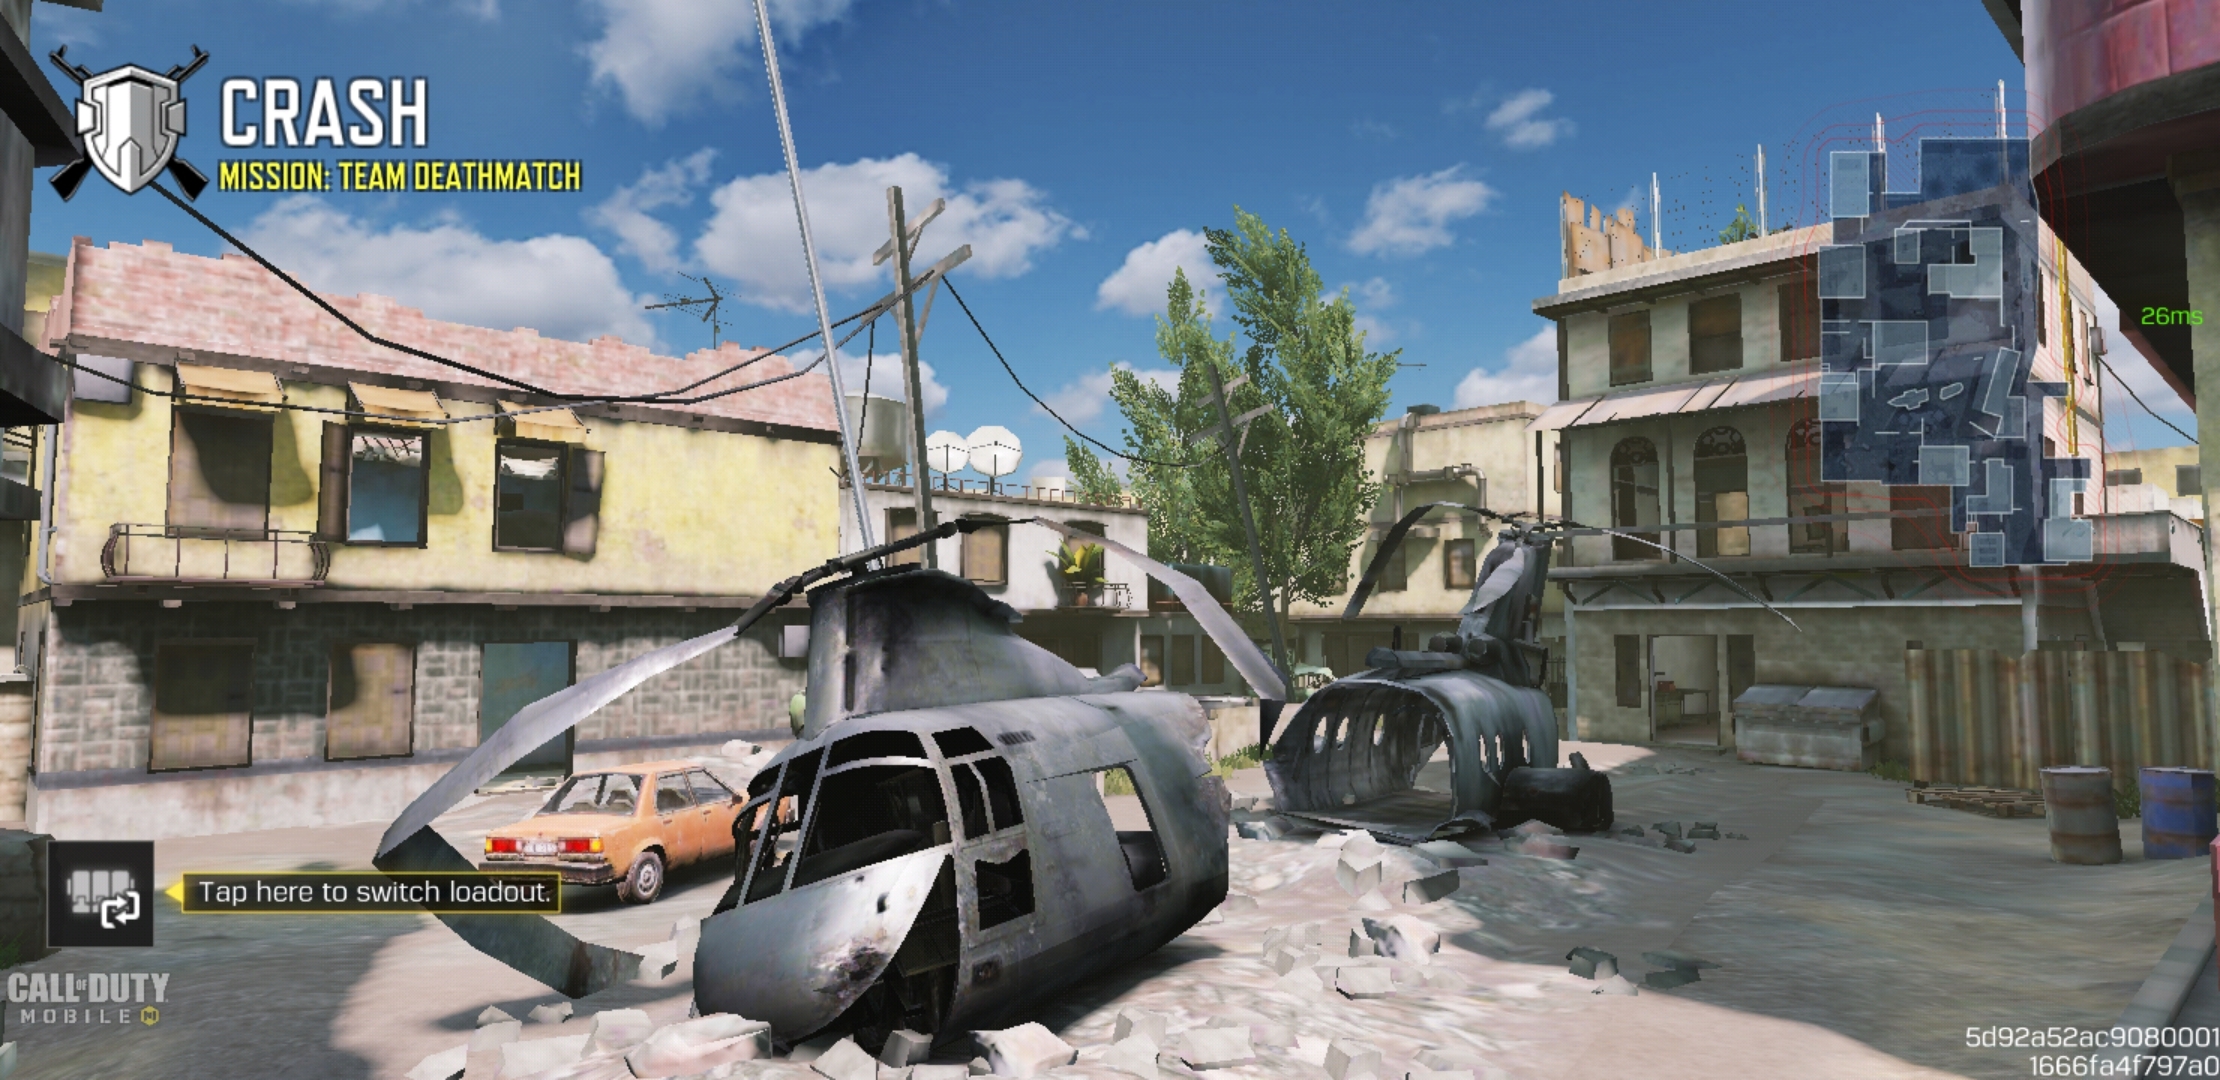 User finds Modern Warfare 2 map is surrounded by secret city